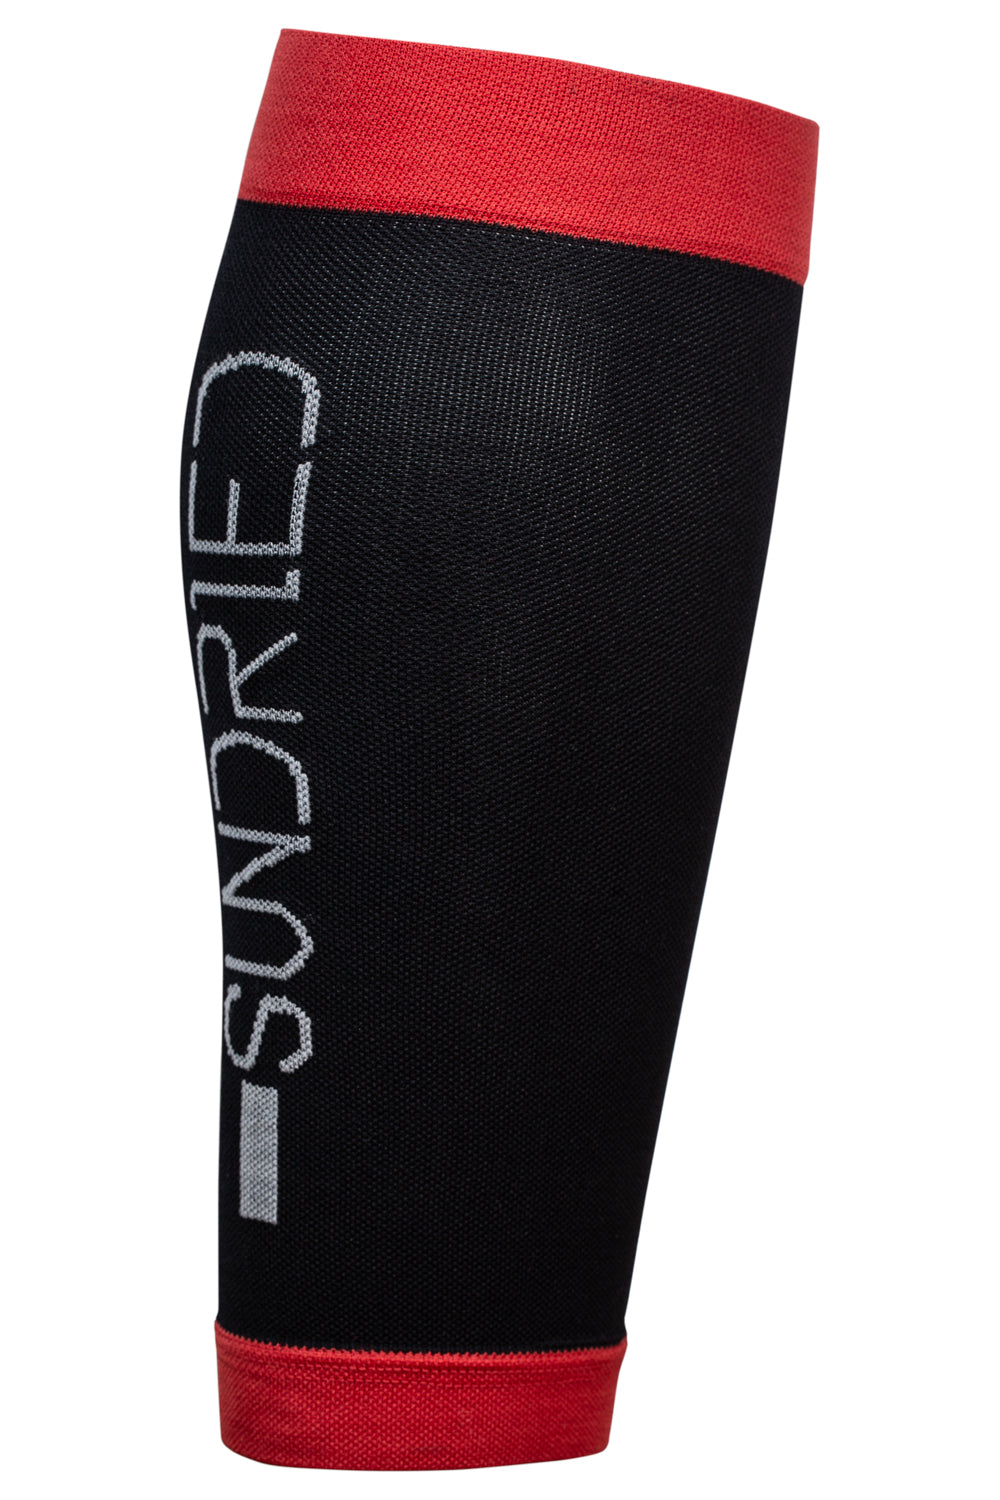 Sundried Compression Calf Sleeve - Lower Leg Sport Support for Running